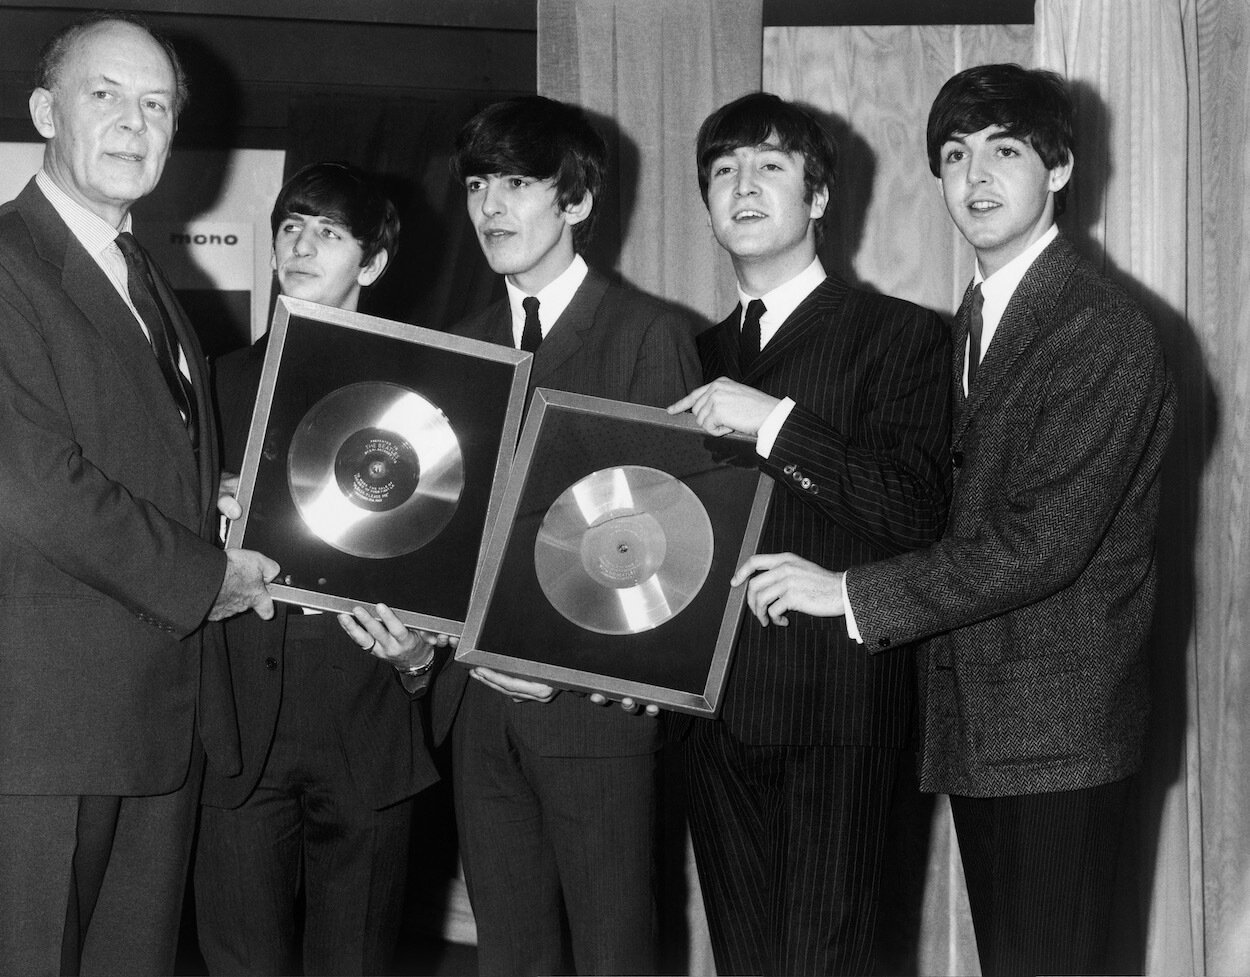 EMI Records chairman Joseph Lockwood presents Ringo Starr, George Harrison, John Lennon, and Paul McCartney with silver records in 1963 for the first two LPs.